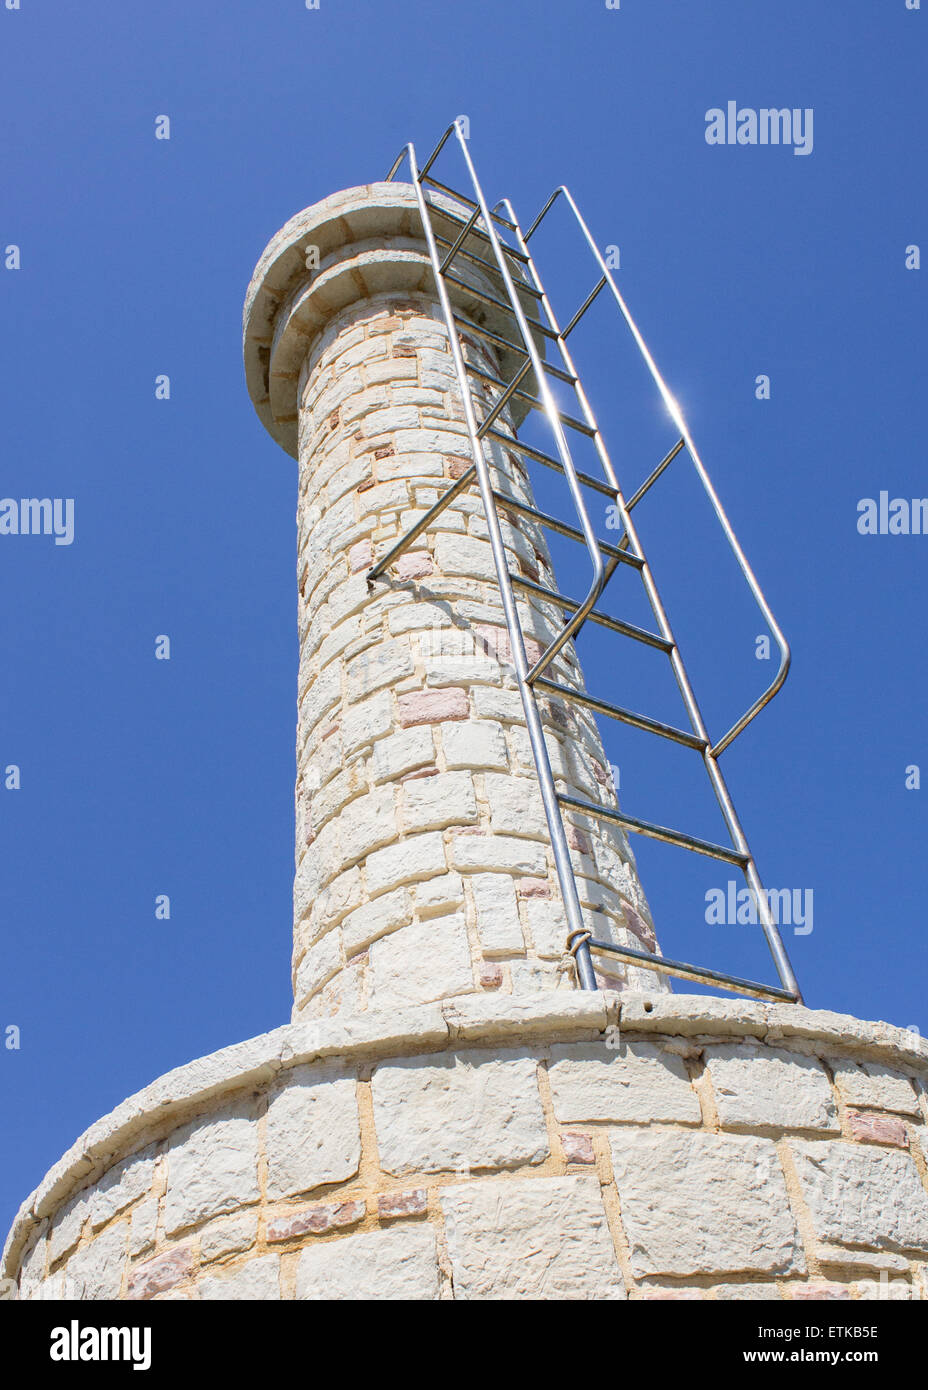 The old lighthouse overlooking the Port of Hersonissos in Crete, Greece. Stock Photo